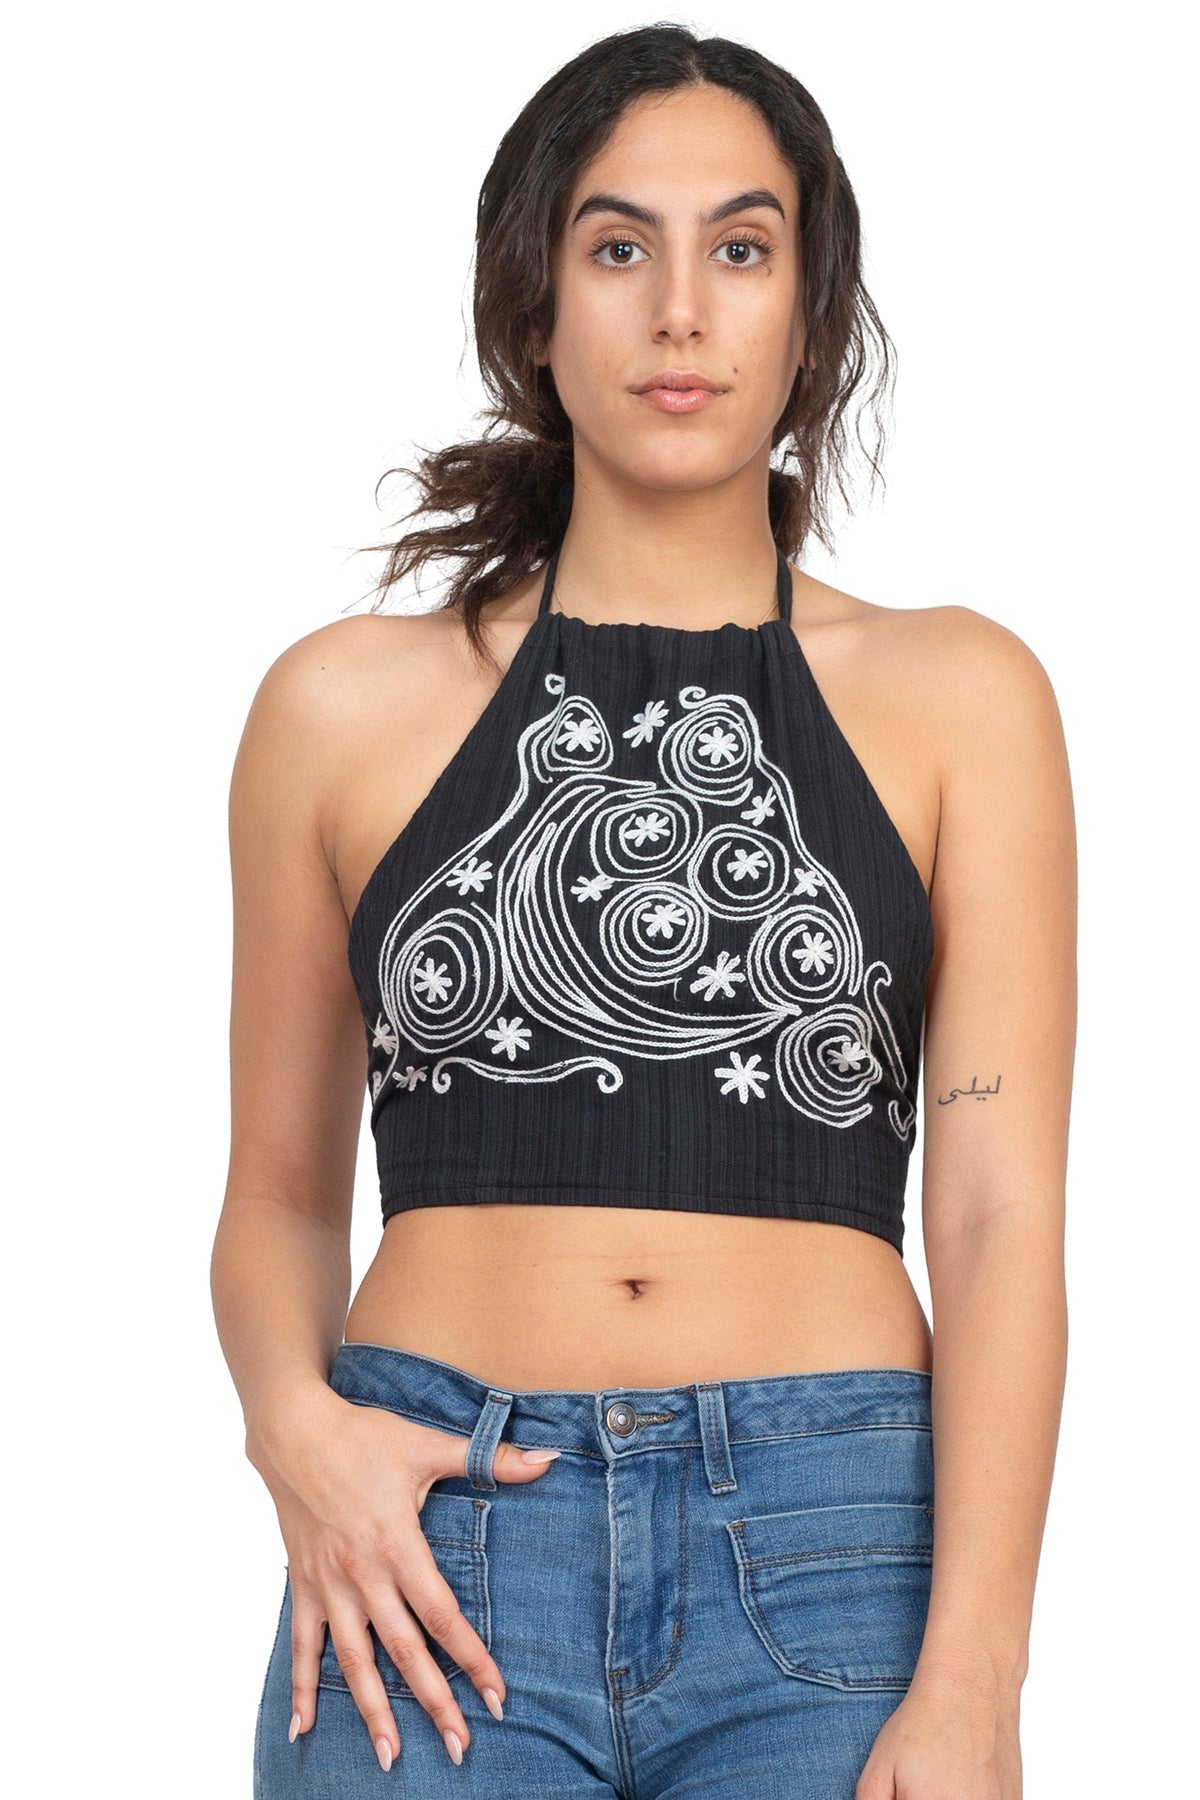 Celestial Embroidery Halter Top